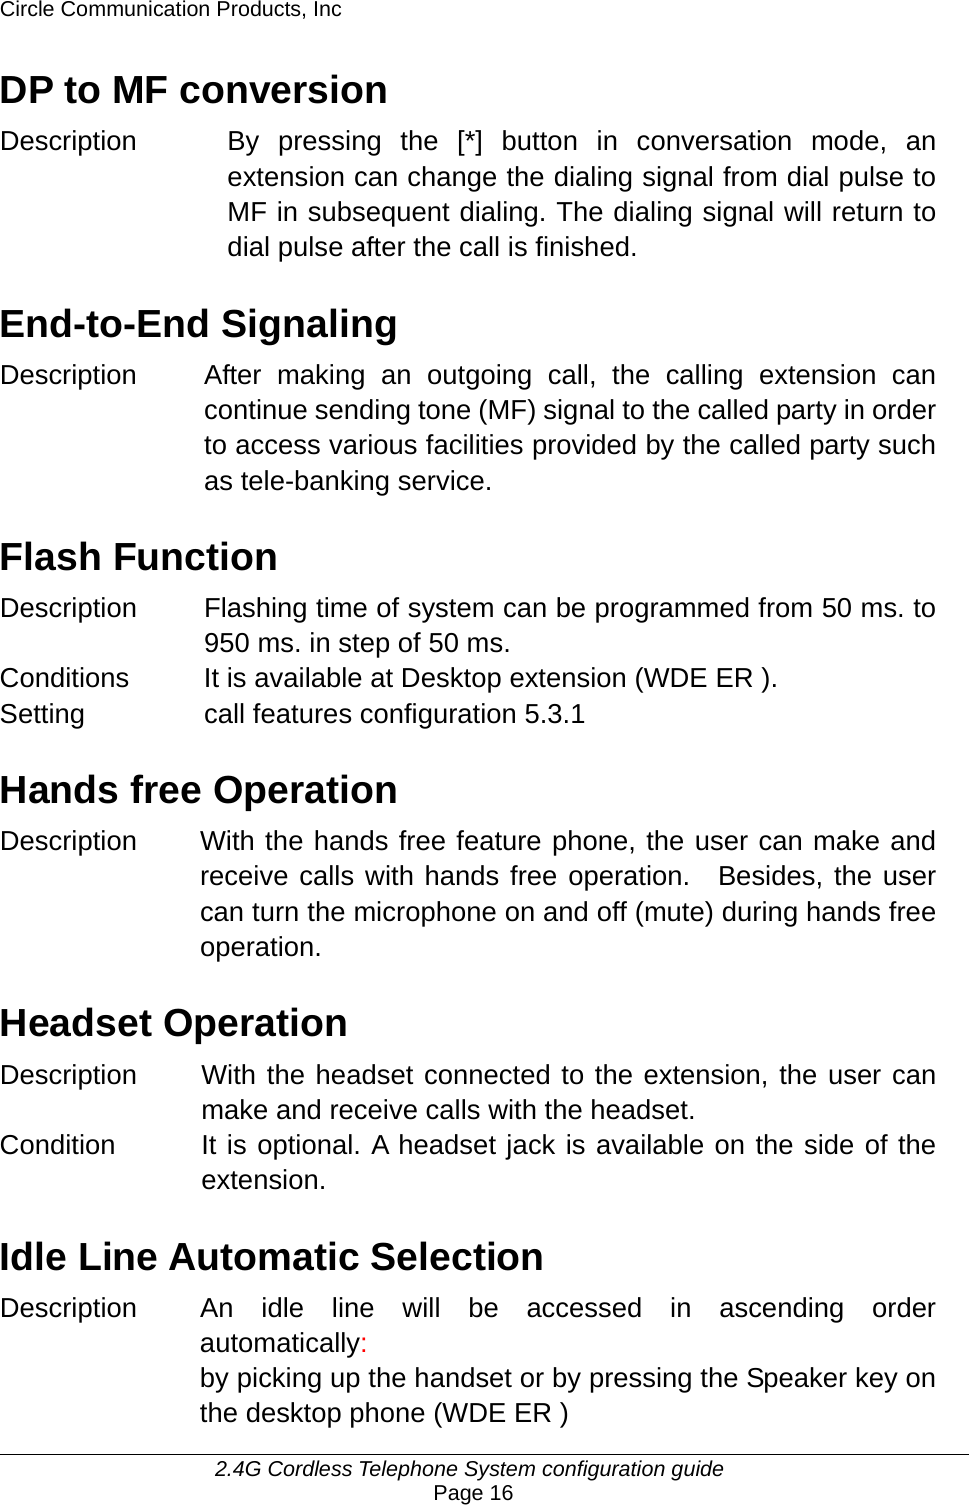 Circle Communication Products, Inc     2.4G Cordless Telephone System configuration guide Page 16 DP to MF conversion Description By pressing the [*] button in conversation mode, an extension can change the dialing signal from dial pulse to MF in subsequent dialing. The dialing signal will return to dial pulse after the call is finished.  End-to-End Signaling Description After making an outgoing call, the calling extension can continue sending tone (MF) signal to the called party in order to access various facilities provided by the called party such as tele-banking service.  Flash Function Description  Flashing time of system can be programmed from 50 ms. to 950 ms. in step of 50 ms. Conditions  It is available at Desktop extension (WDE ER ). Setting call features configuration 5.3.1  Hands free Operation Description With the hands free feature phone, the user can make and receive calls with hands free operation.  Besides, the user can turn the microphone on and off (mute) during hands free operation.  Headset Operation Description  With the headset connected to the extension, the user can make and receive calls with the headset.   Condition  It is optional. A headset jack is available on the side of the extension.  Idle Line Automatic Selection Description  An idle line will be accessed in ascending order automatically: by picking up the handset or by pressing the Speaker key on the desktop phone (WDE ER ) 